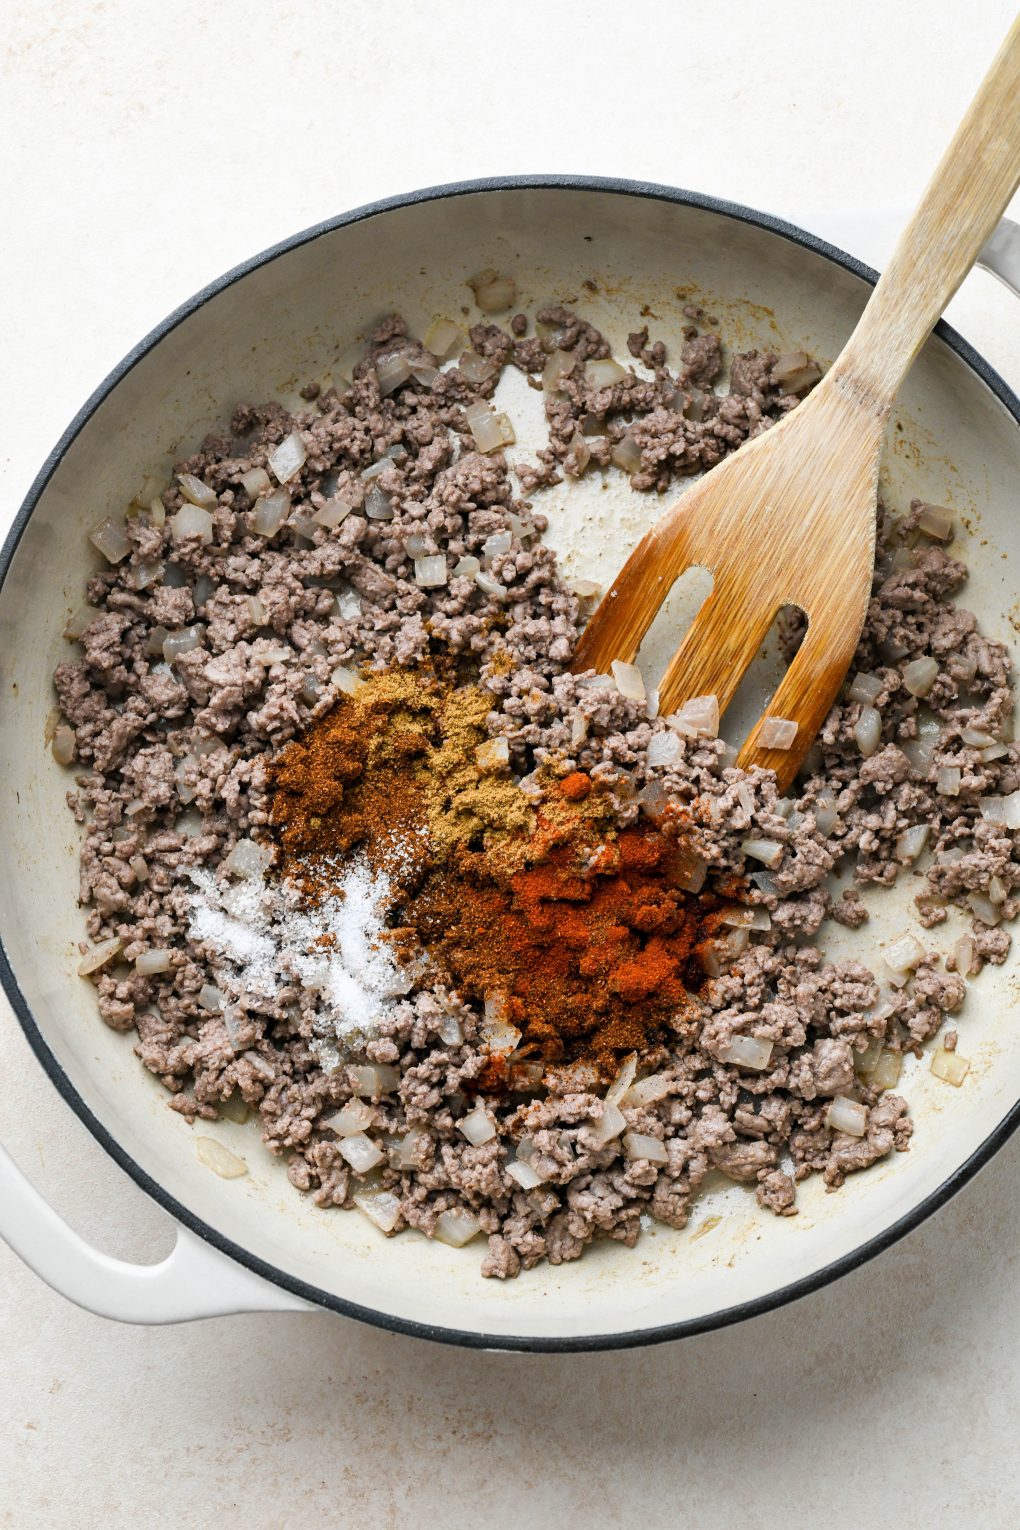 How to make Dairy Free Queso Fundido with Ground Beef: Cooked ground beef and onion in skillet with spices on top.